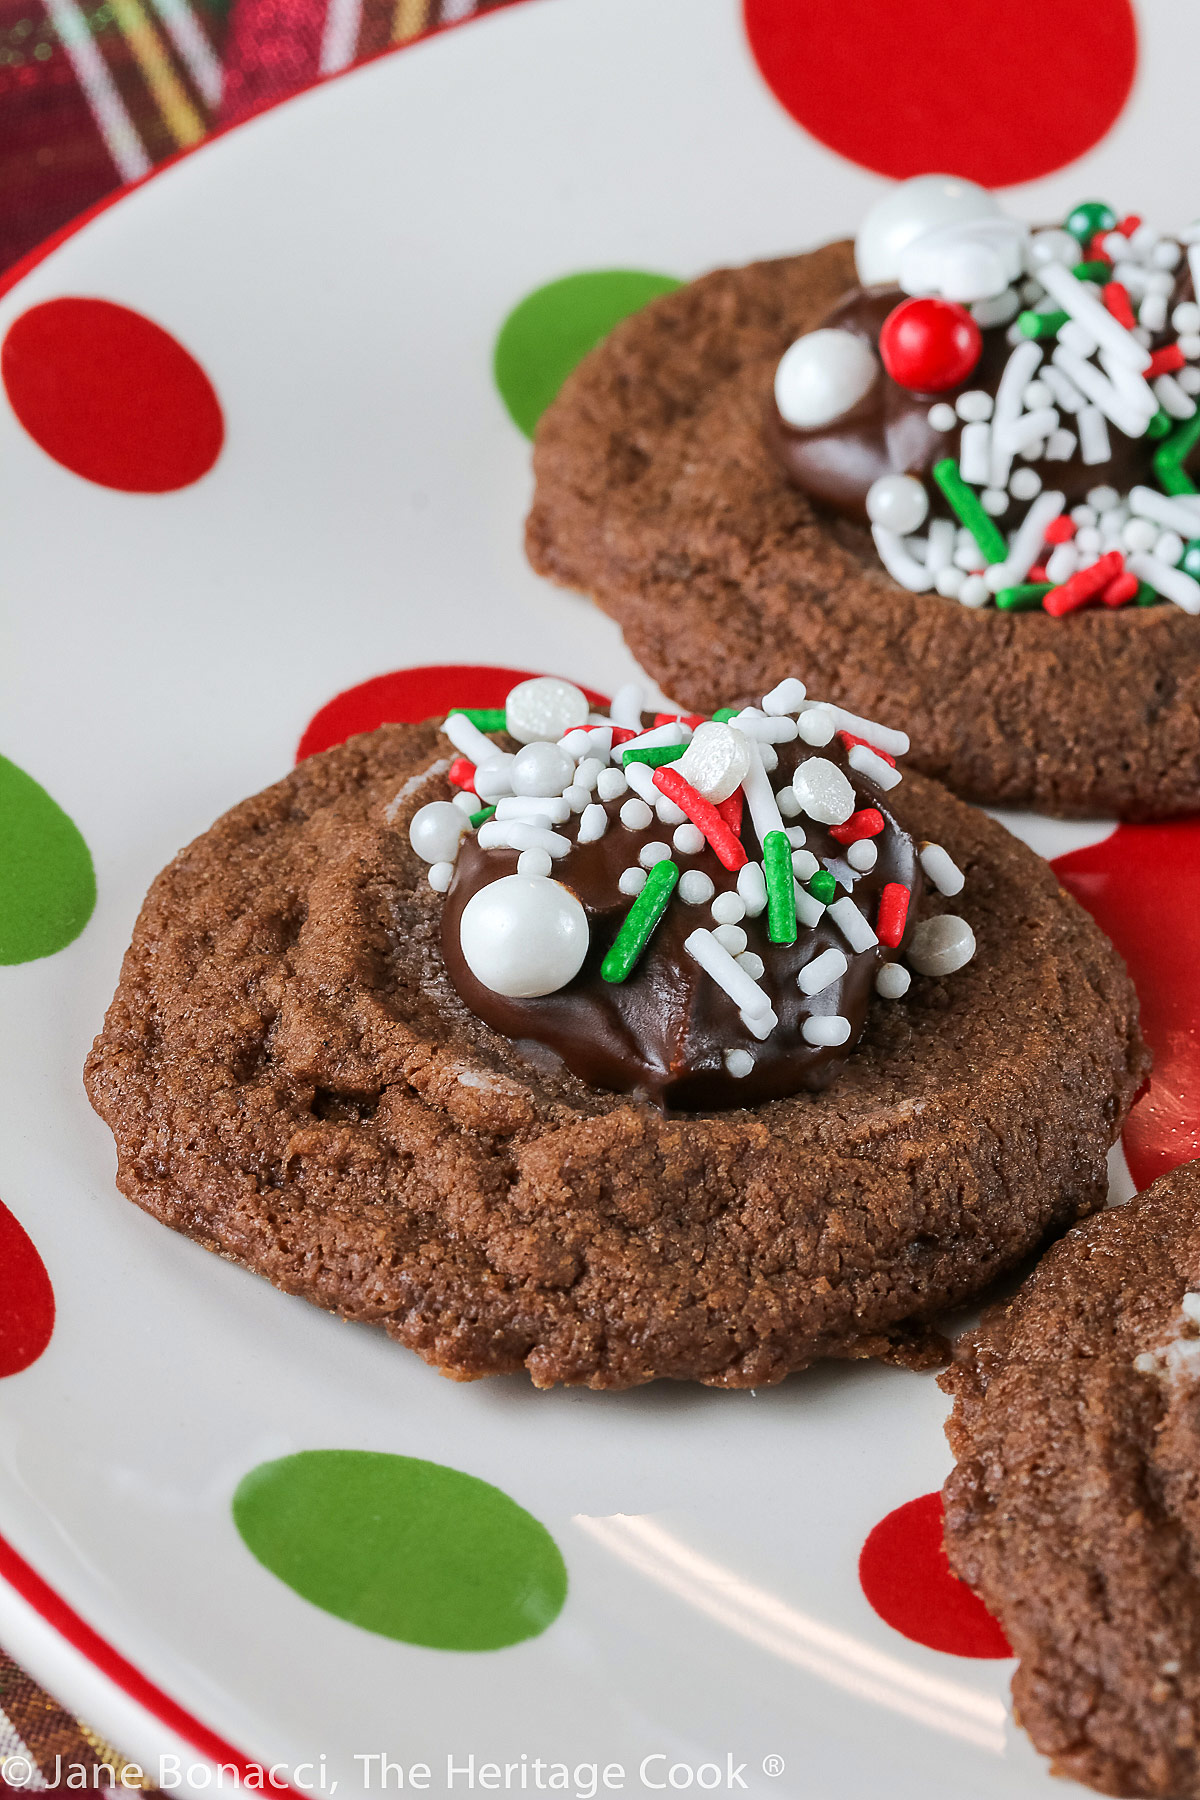 Small cookie cups filled with mint chocolate ganache and topped with festive holiday sprinkles; Hot Chocolate Mint Thumbprint Cookies © 2022 Jane Bonacci, The Heritage Cook. 